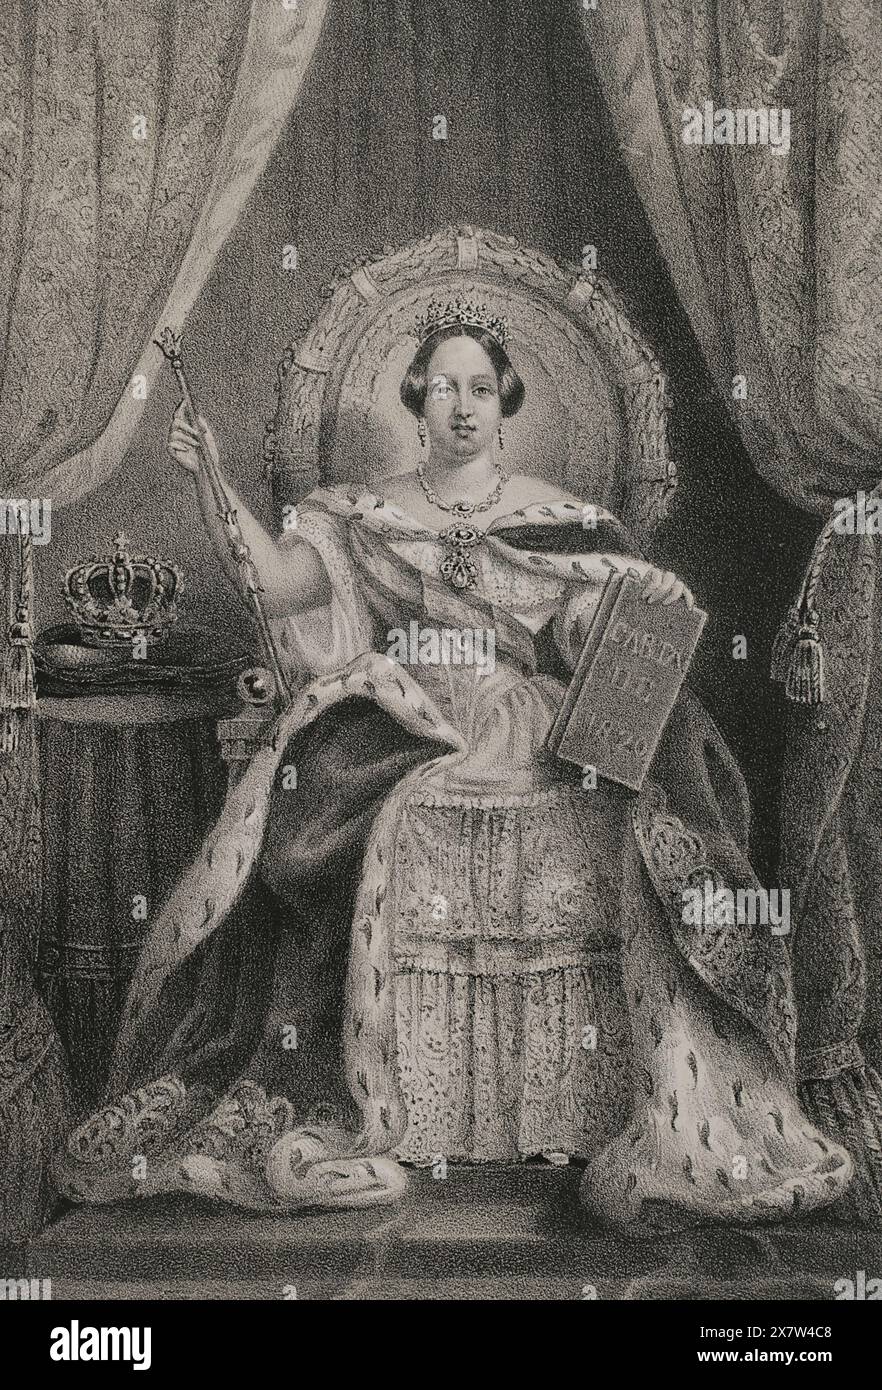 Maria II of Portugal (1819-1853). Queen of Portugal born in Rio de Janeiro (Brazil), called 'the Good Mother' and 'the Educator'. She reigned for two periods: 1826-1828 and 1834-1853. Portrait. Drawing by C. Legrand. Lithography by J. Donón. 'Reyes Contemporáneos' (Contemporary Kings). Volume III. Published in Madrid, 1854. Stock Photo